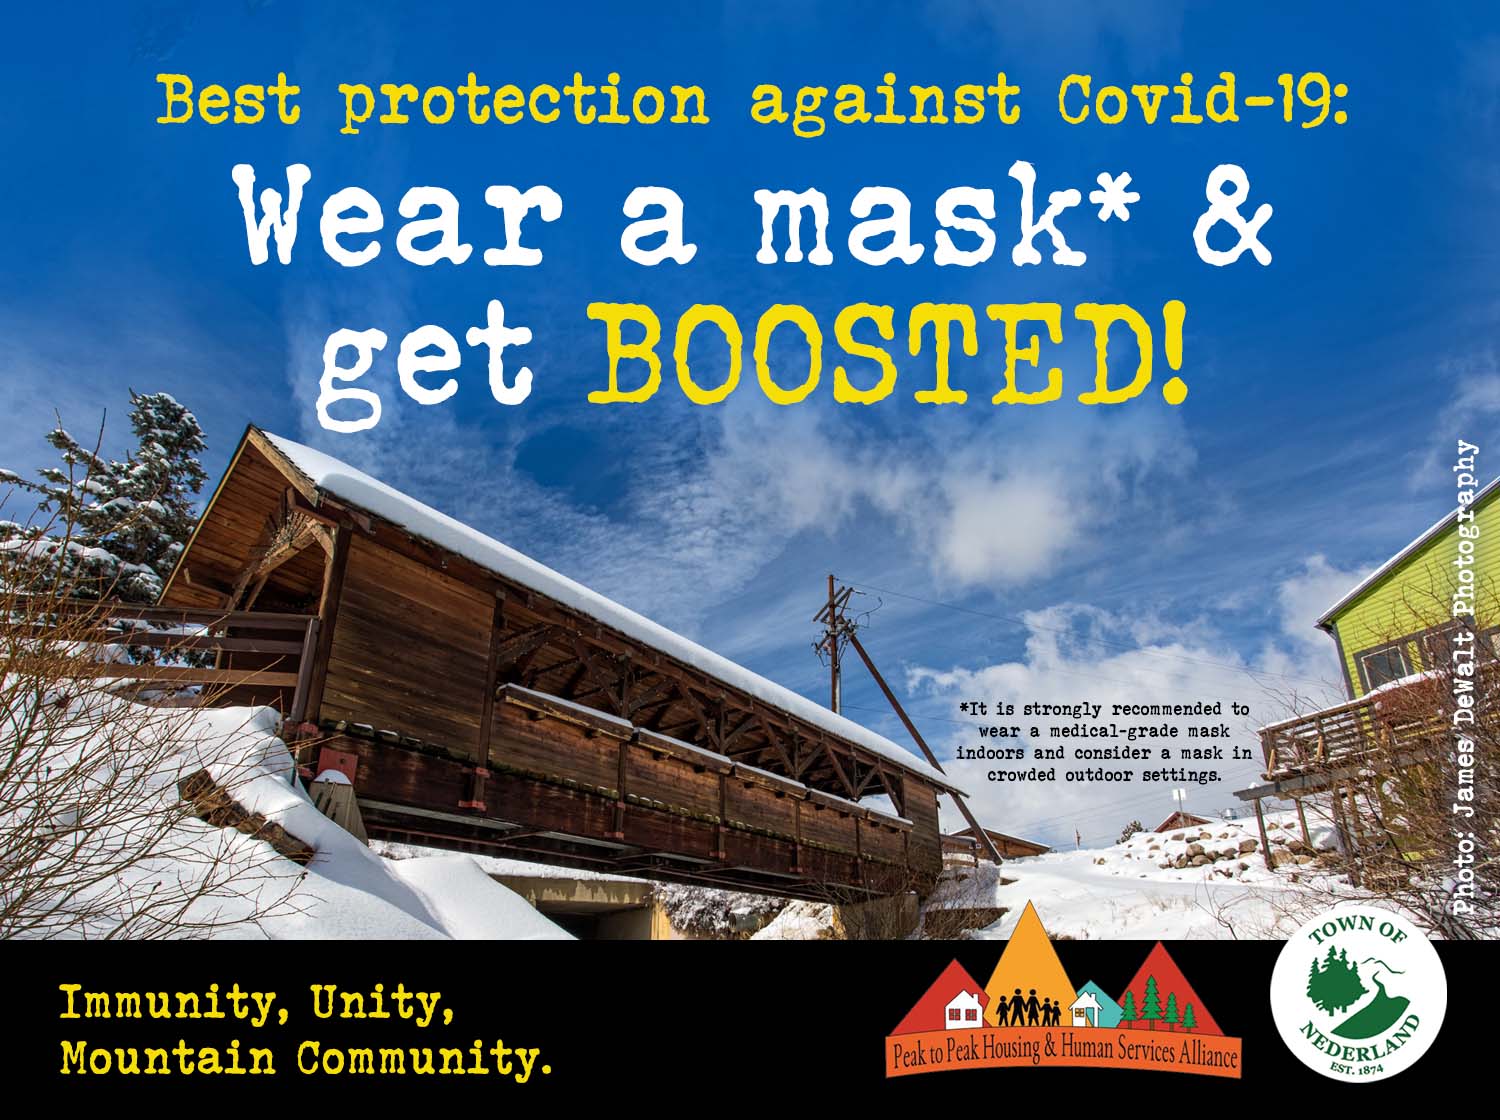 Flyer shows a snow covered mountain with a cabin with the words "Best protection against COVID-19: Wear a mask and get BOOSTED!"